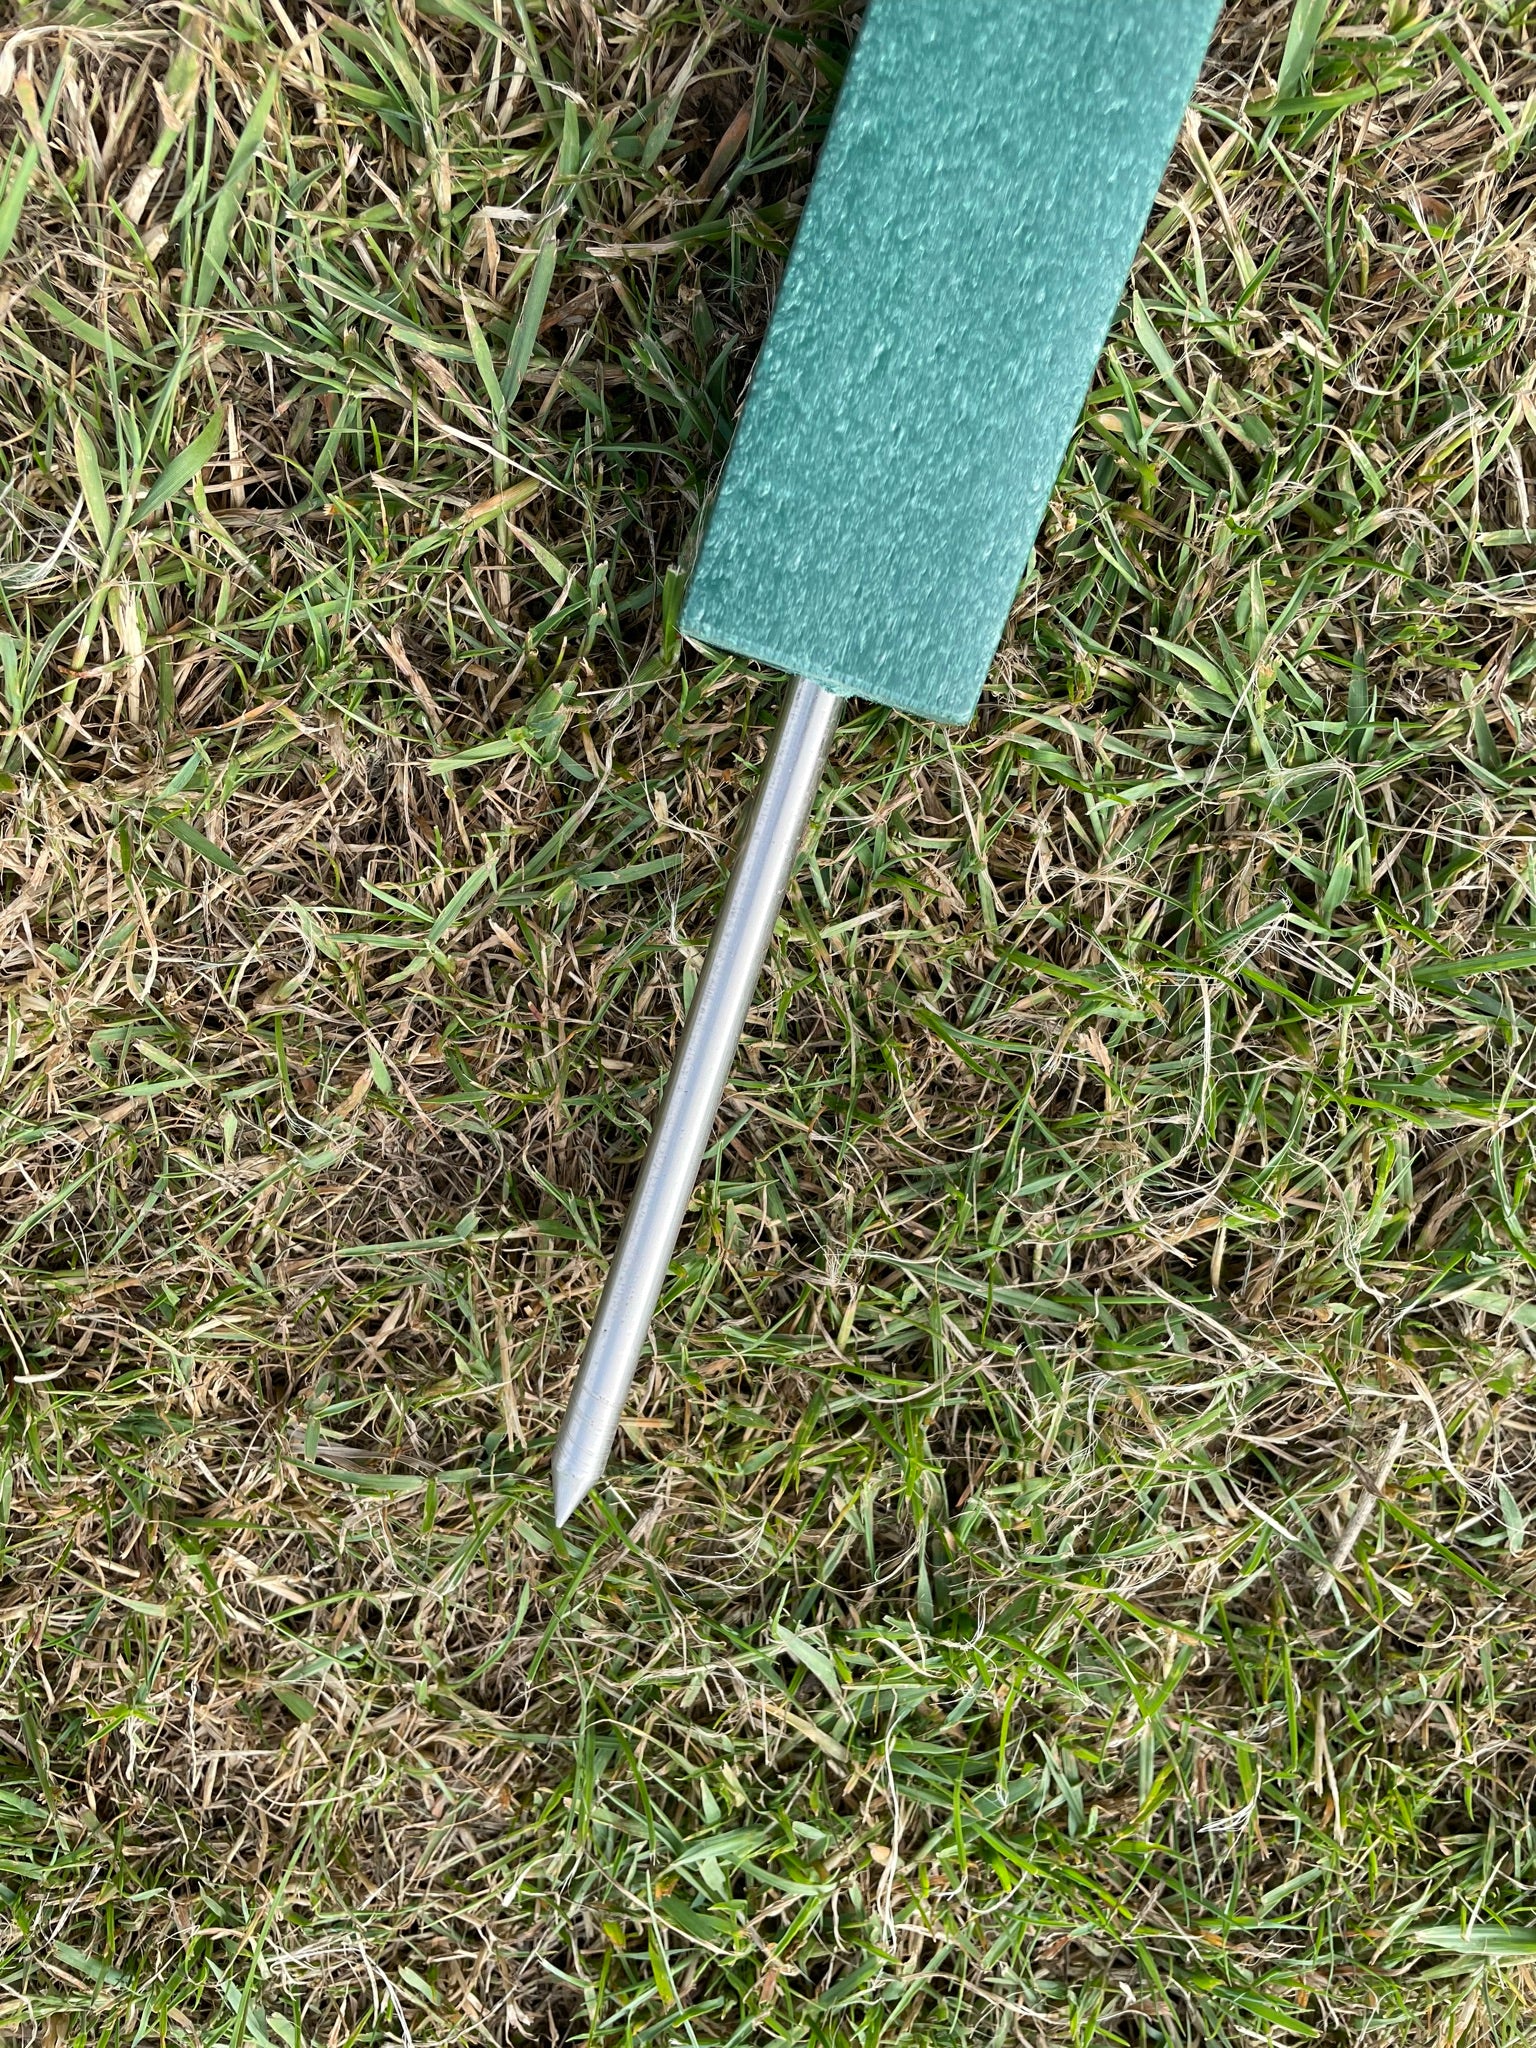 Green Rope Stakes - Golf Course Equipment - TH Golf